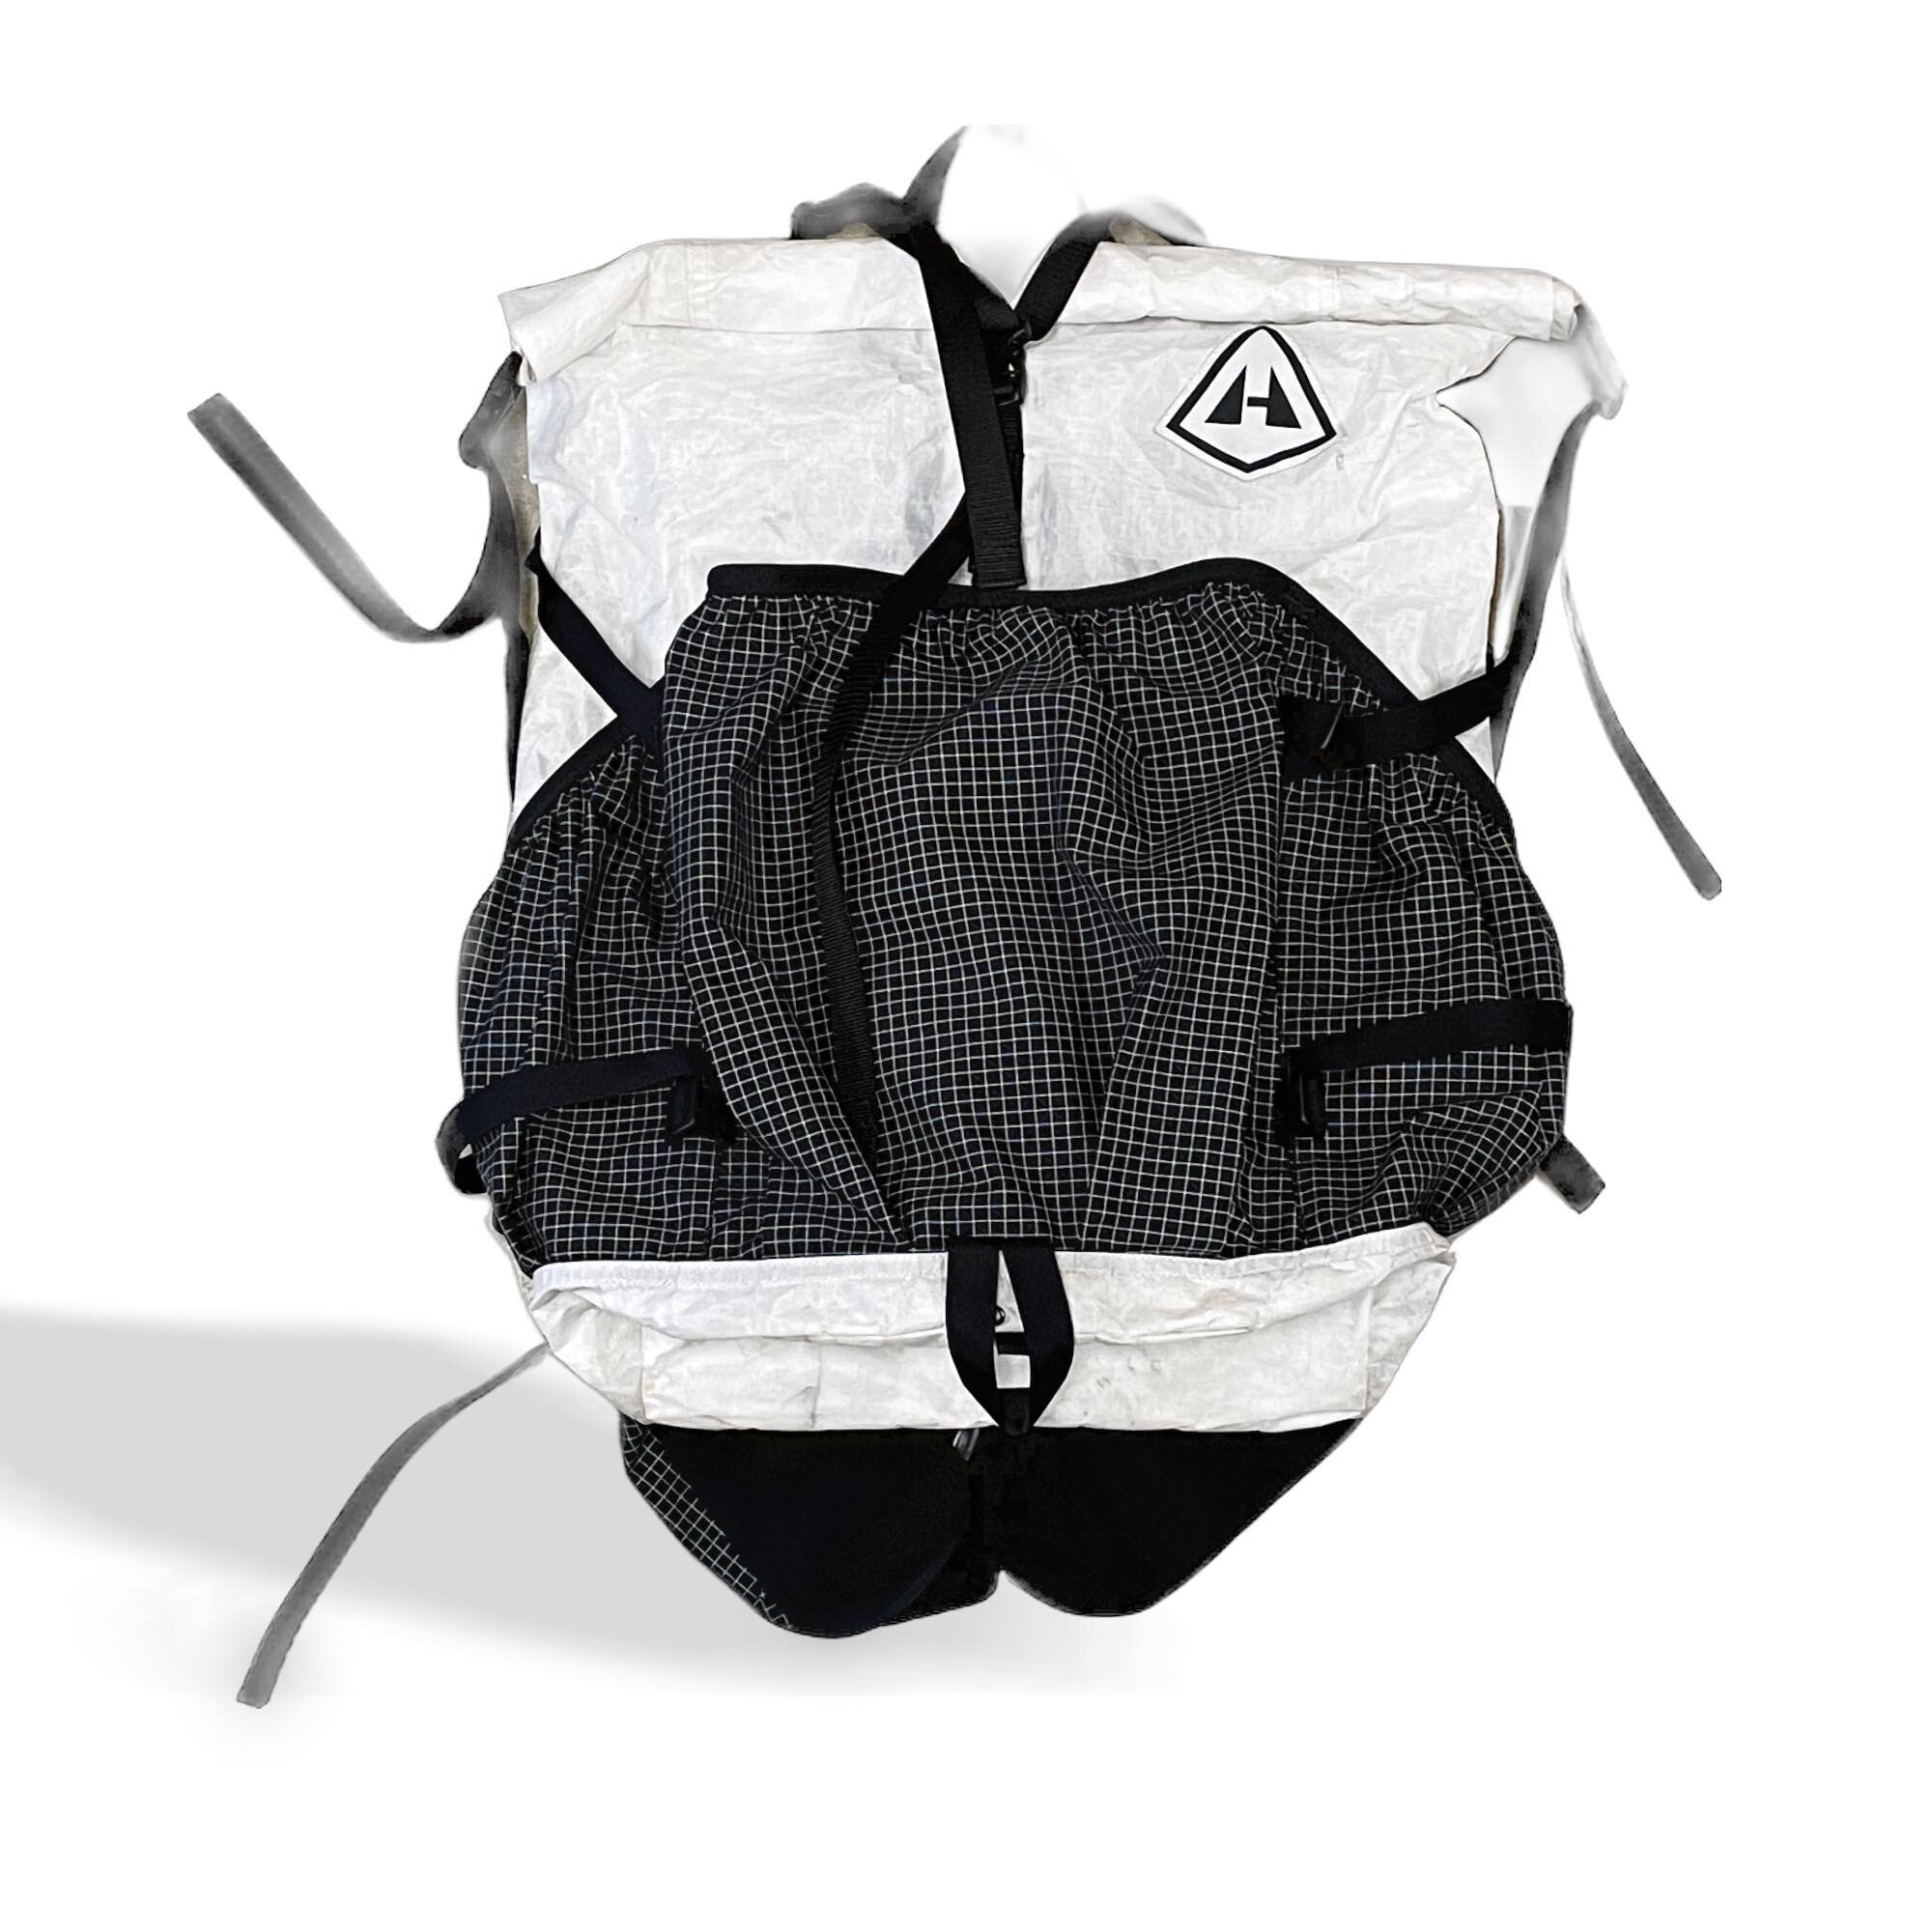 Hey it&rsquo;s one of those all white backpacks everyone loves!

Hyperlite 2400 Southwest 40l- M
MSRP:$349
Cc:$190